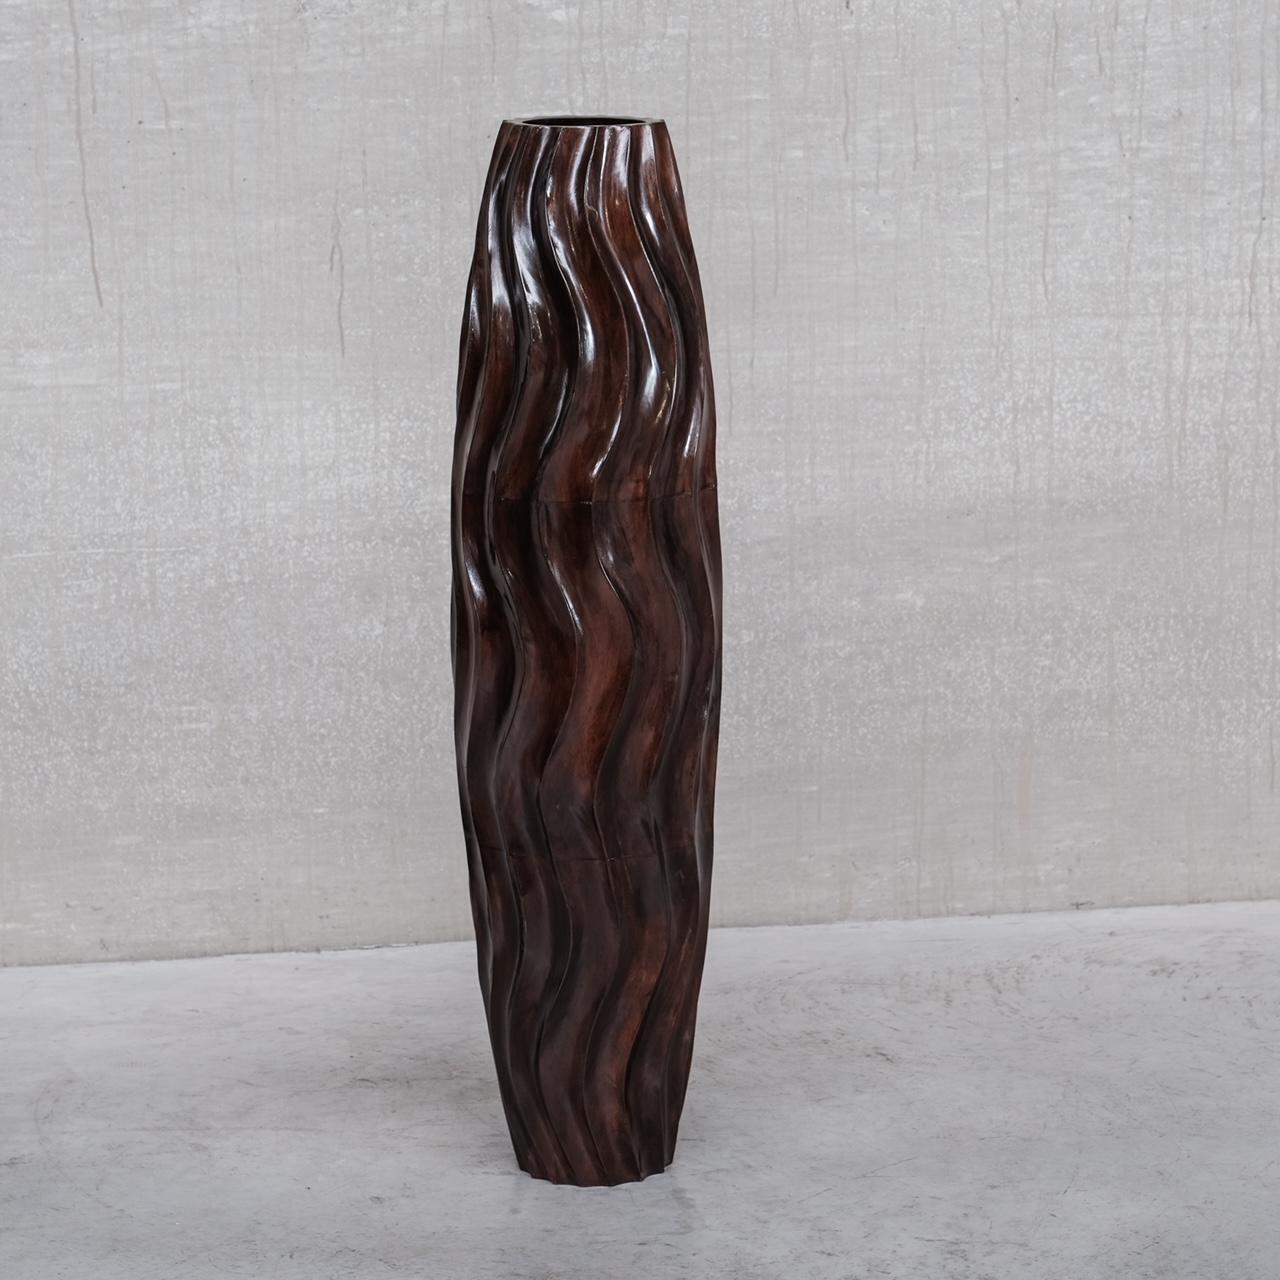 A decorative tall wooden vase. 

France, c1980s. 

Undulated wavy design. 

Sourced with a similar set, which are sold as a pair in another listing. 

Good condition, restored. 

The top diameter is 18 in cm.

Location: Belgium Gallery.

Dimensions: